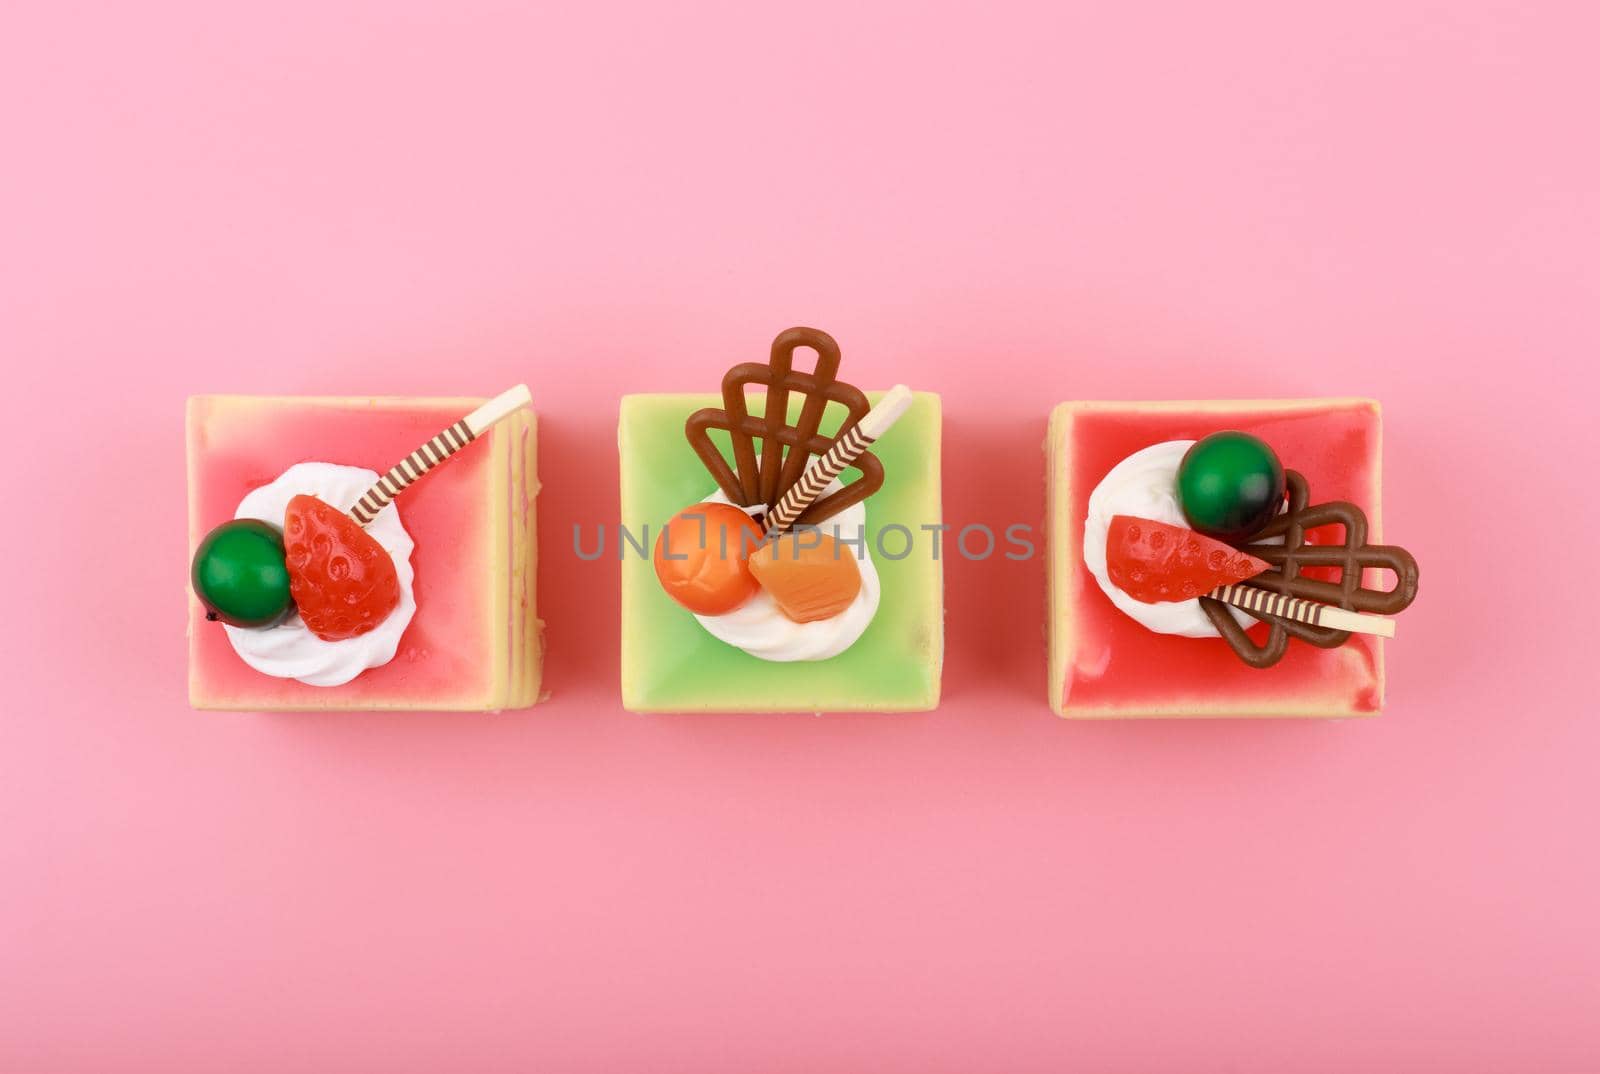 Top view of three colorful mini cakes with berries and chocolate sticks on bright pink background. Concept of sweets or cheat meal